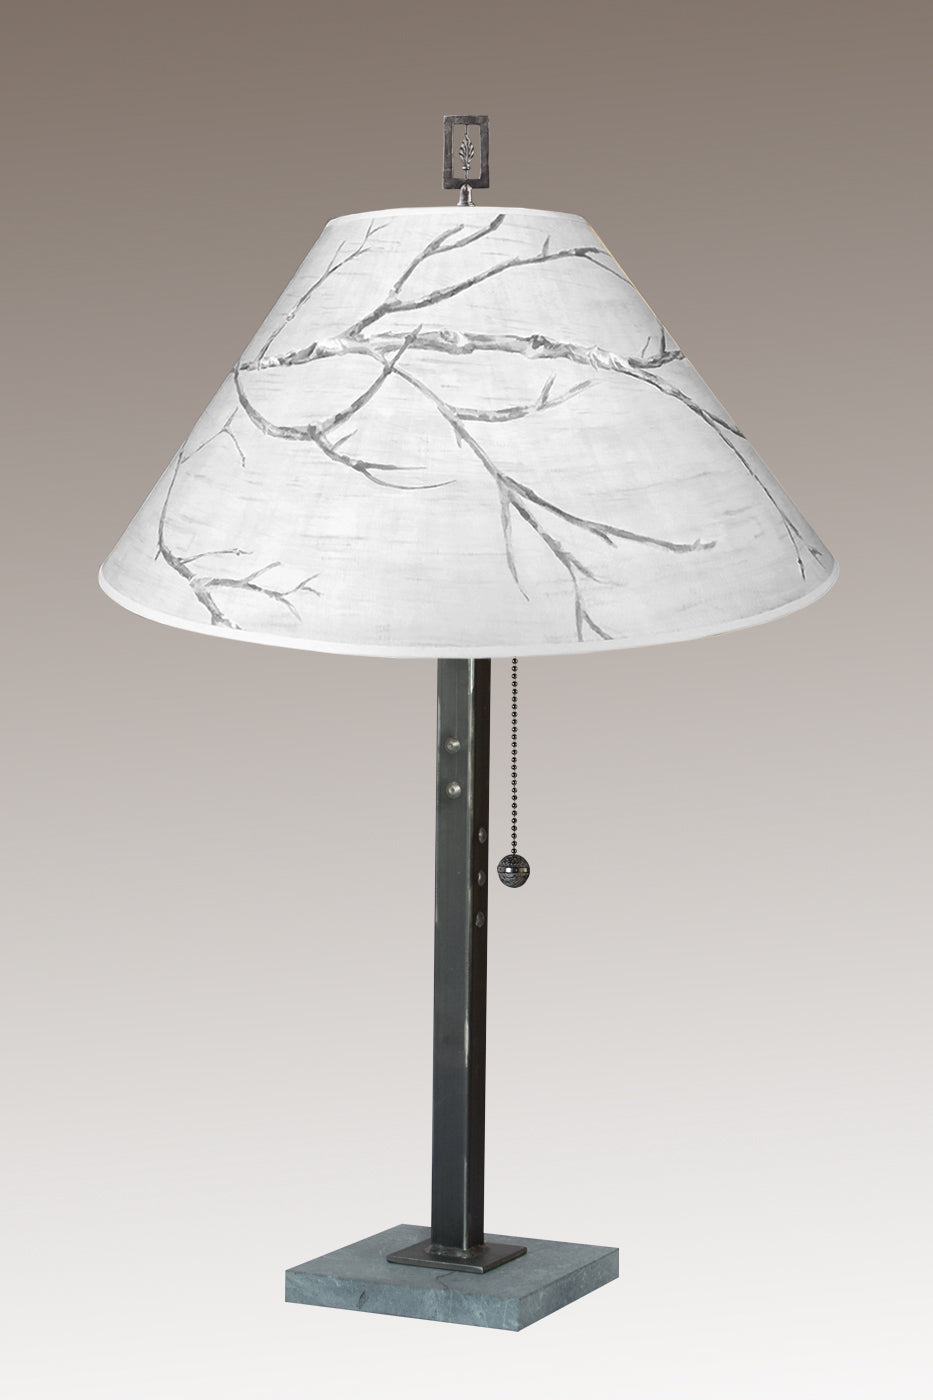 Janna Ugone & Co Table Lamps Steel Table Lamp with Large Conical Shade in Sweeping Branch